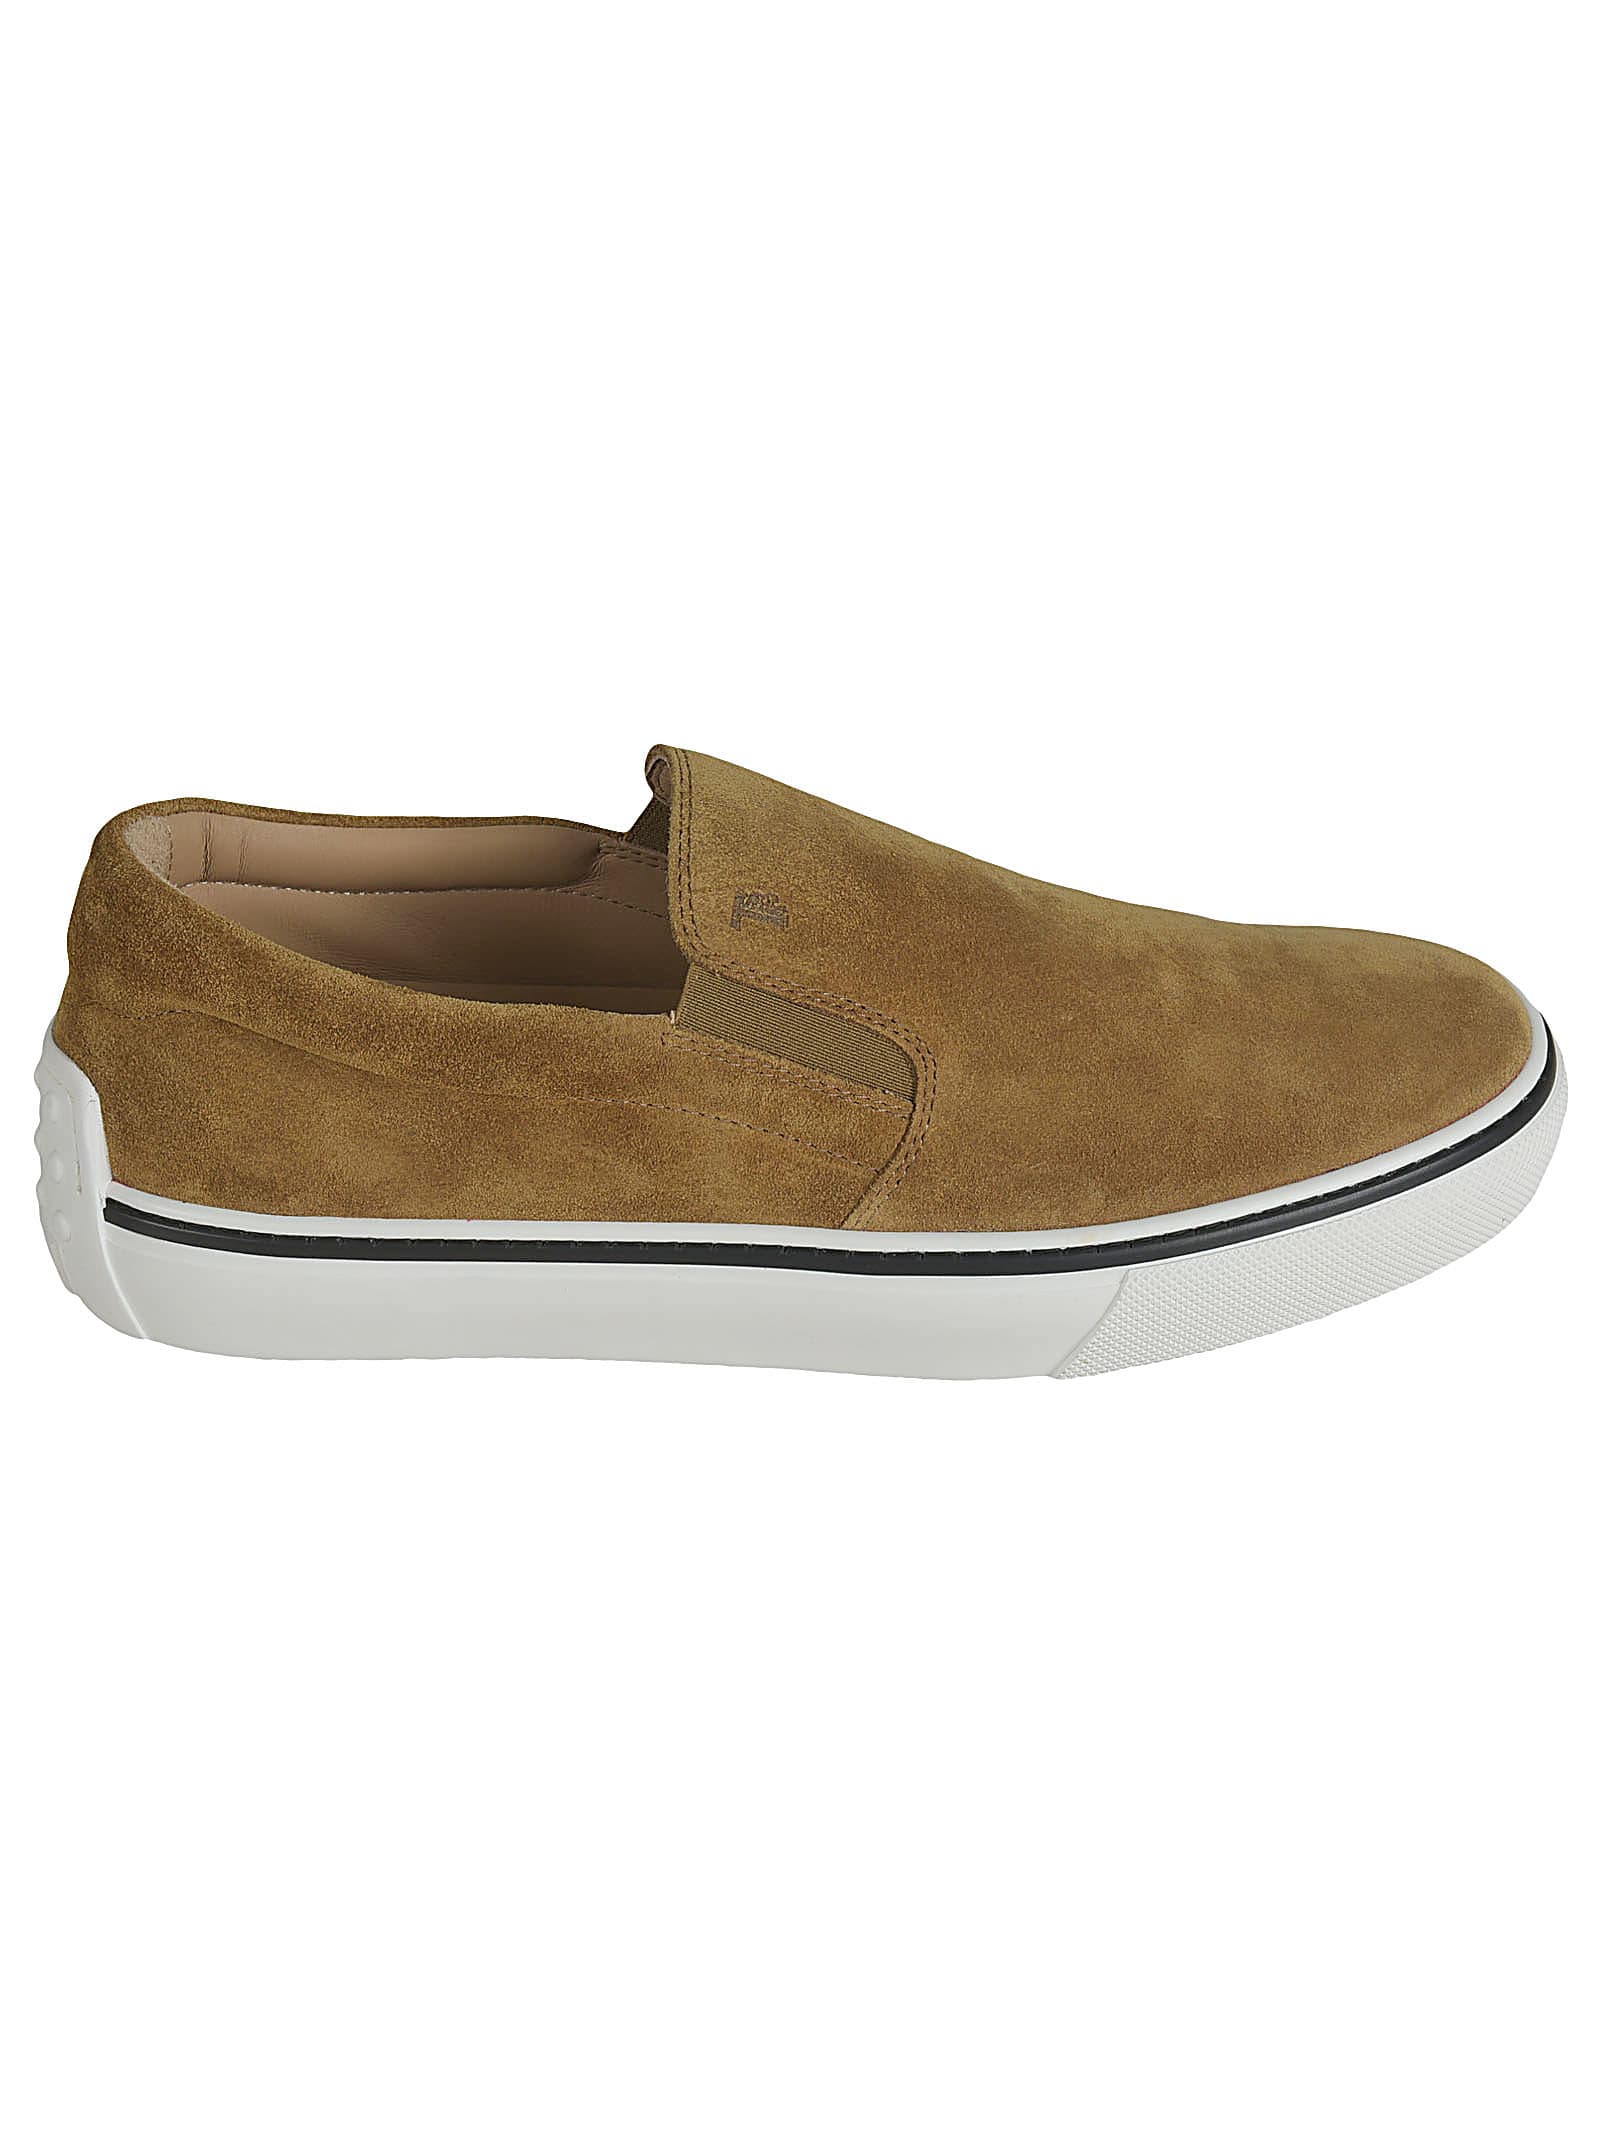 Tods Logo Stamped Slip-on Shoes